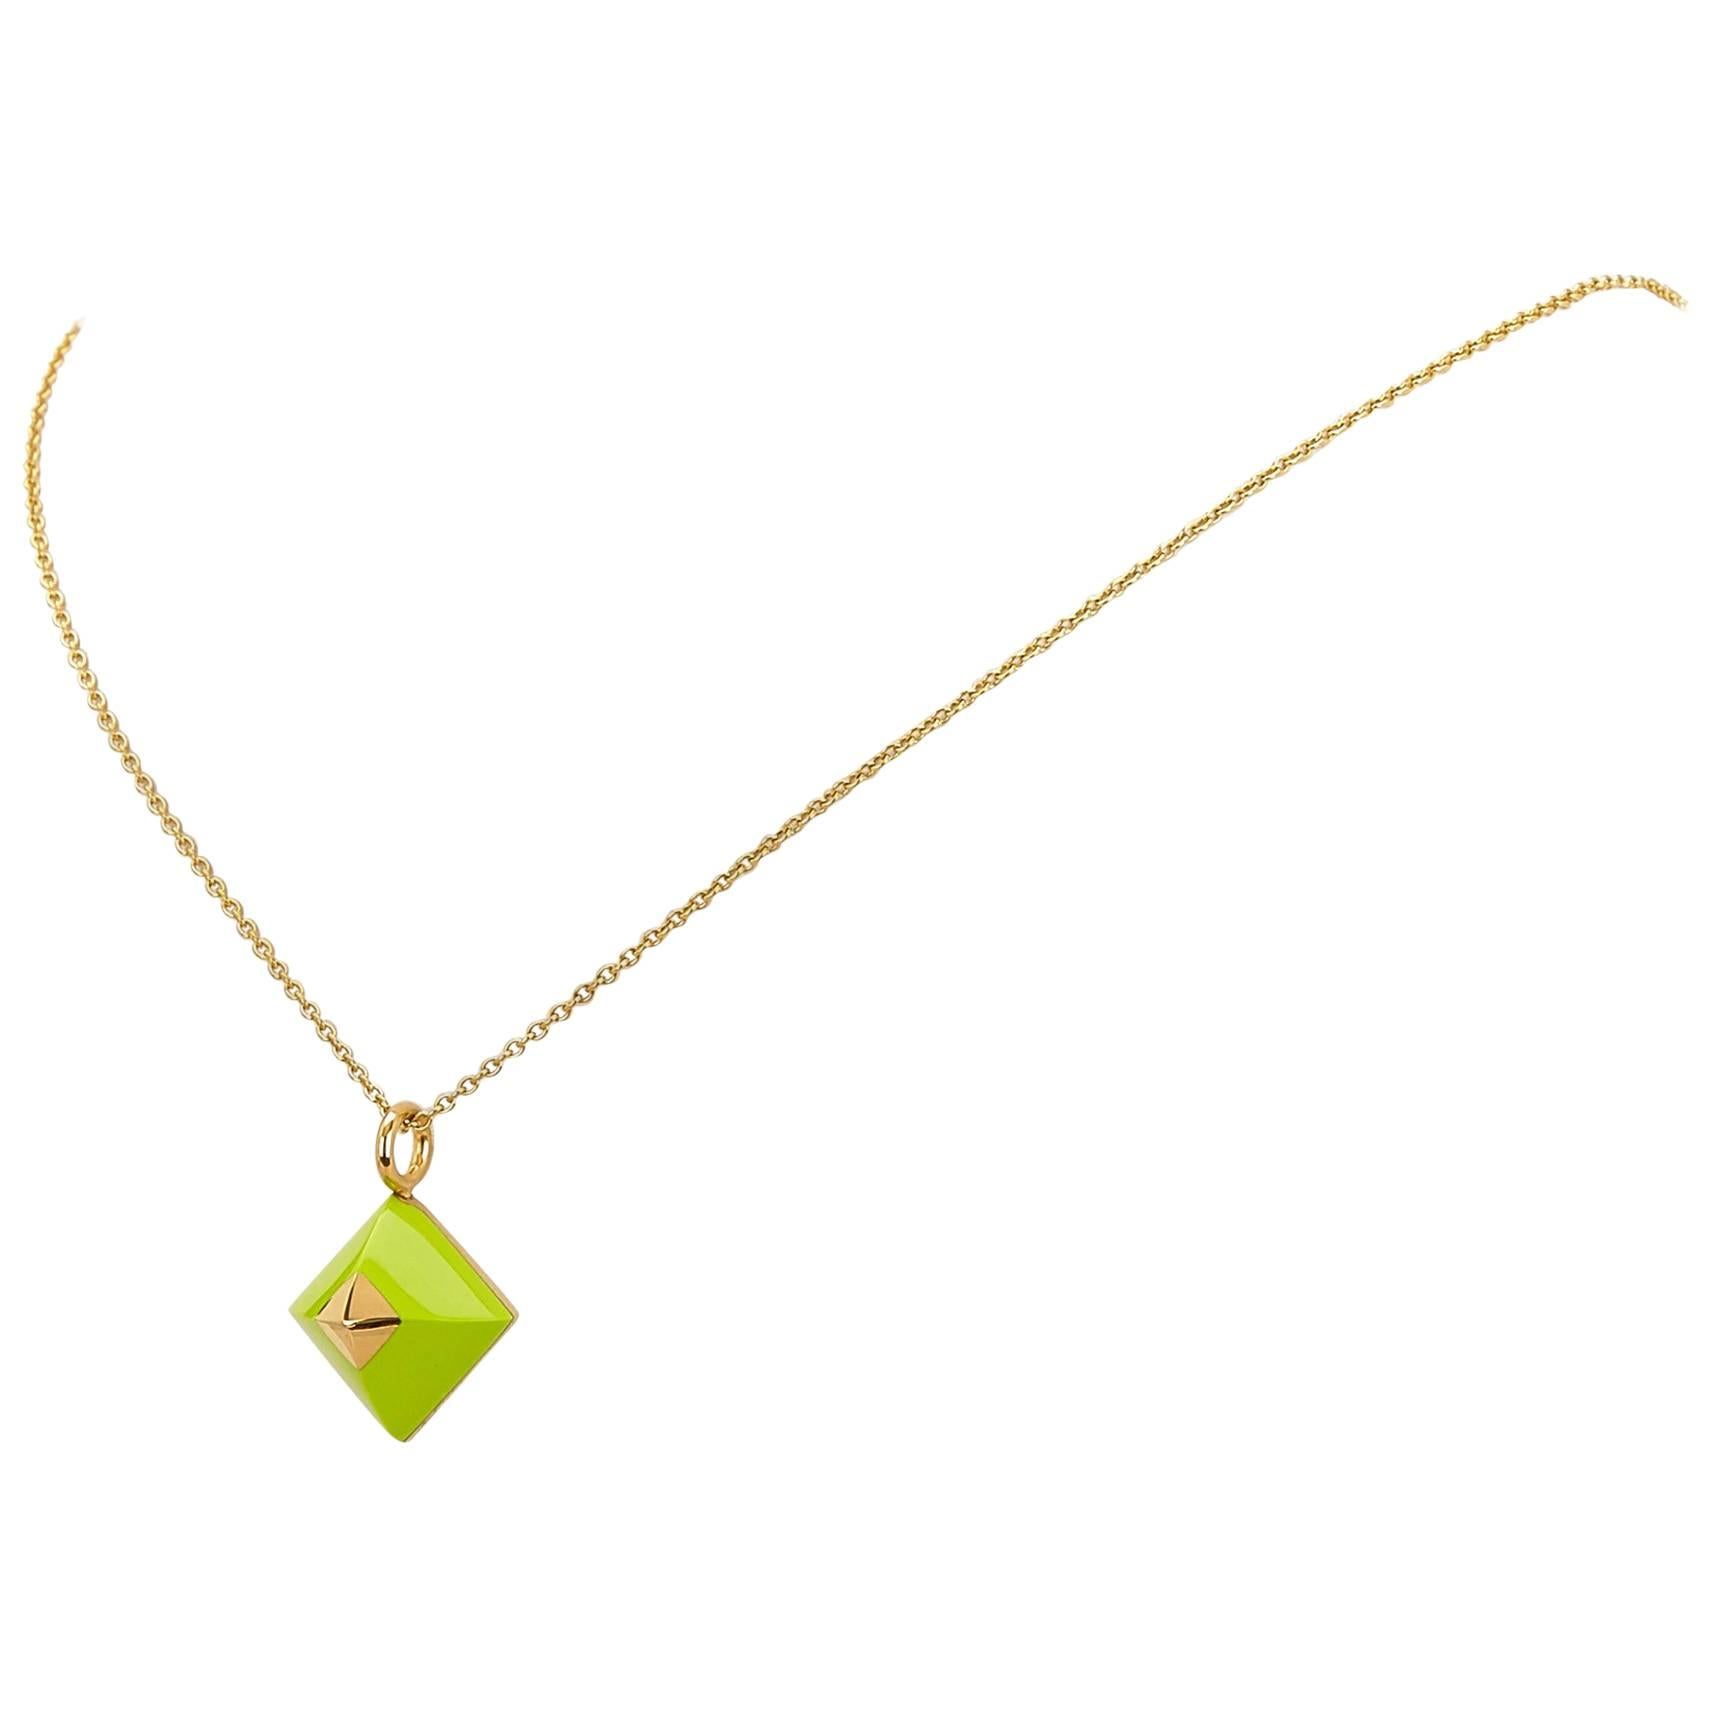 Hermes Green Gold Toned Pyramid Pendant Necklace 